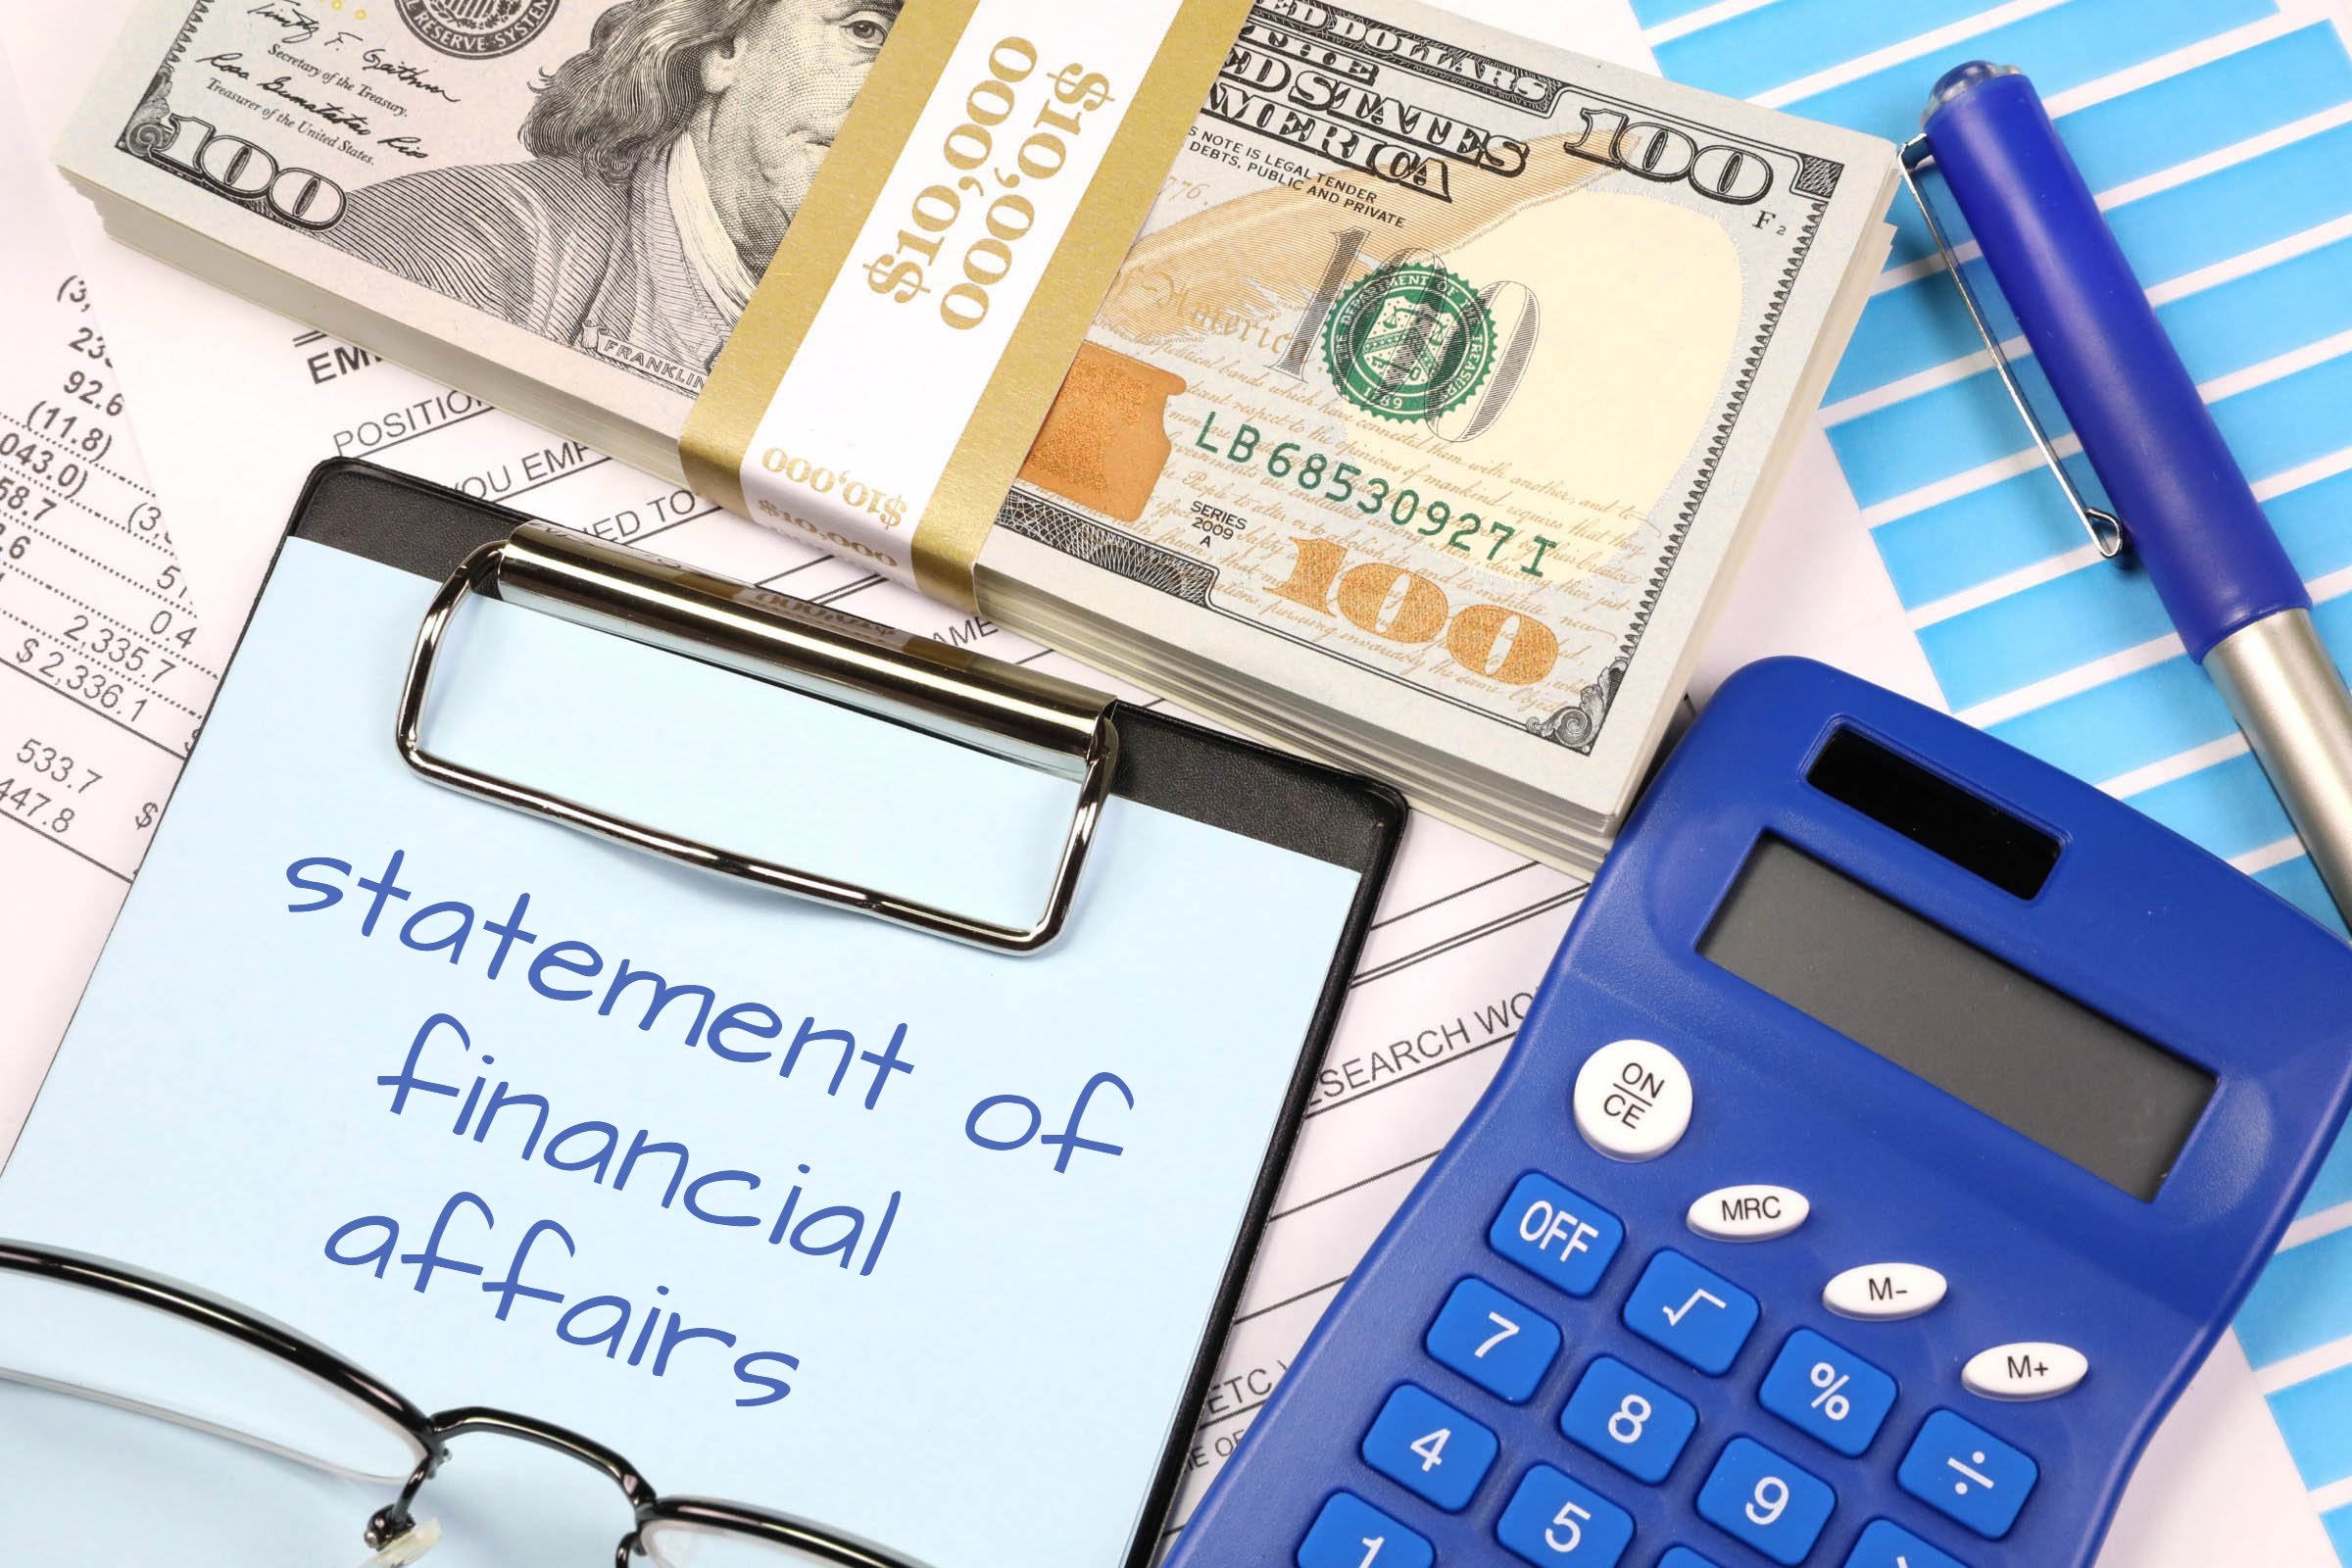 Statement of Financial Affairs